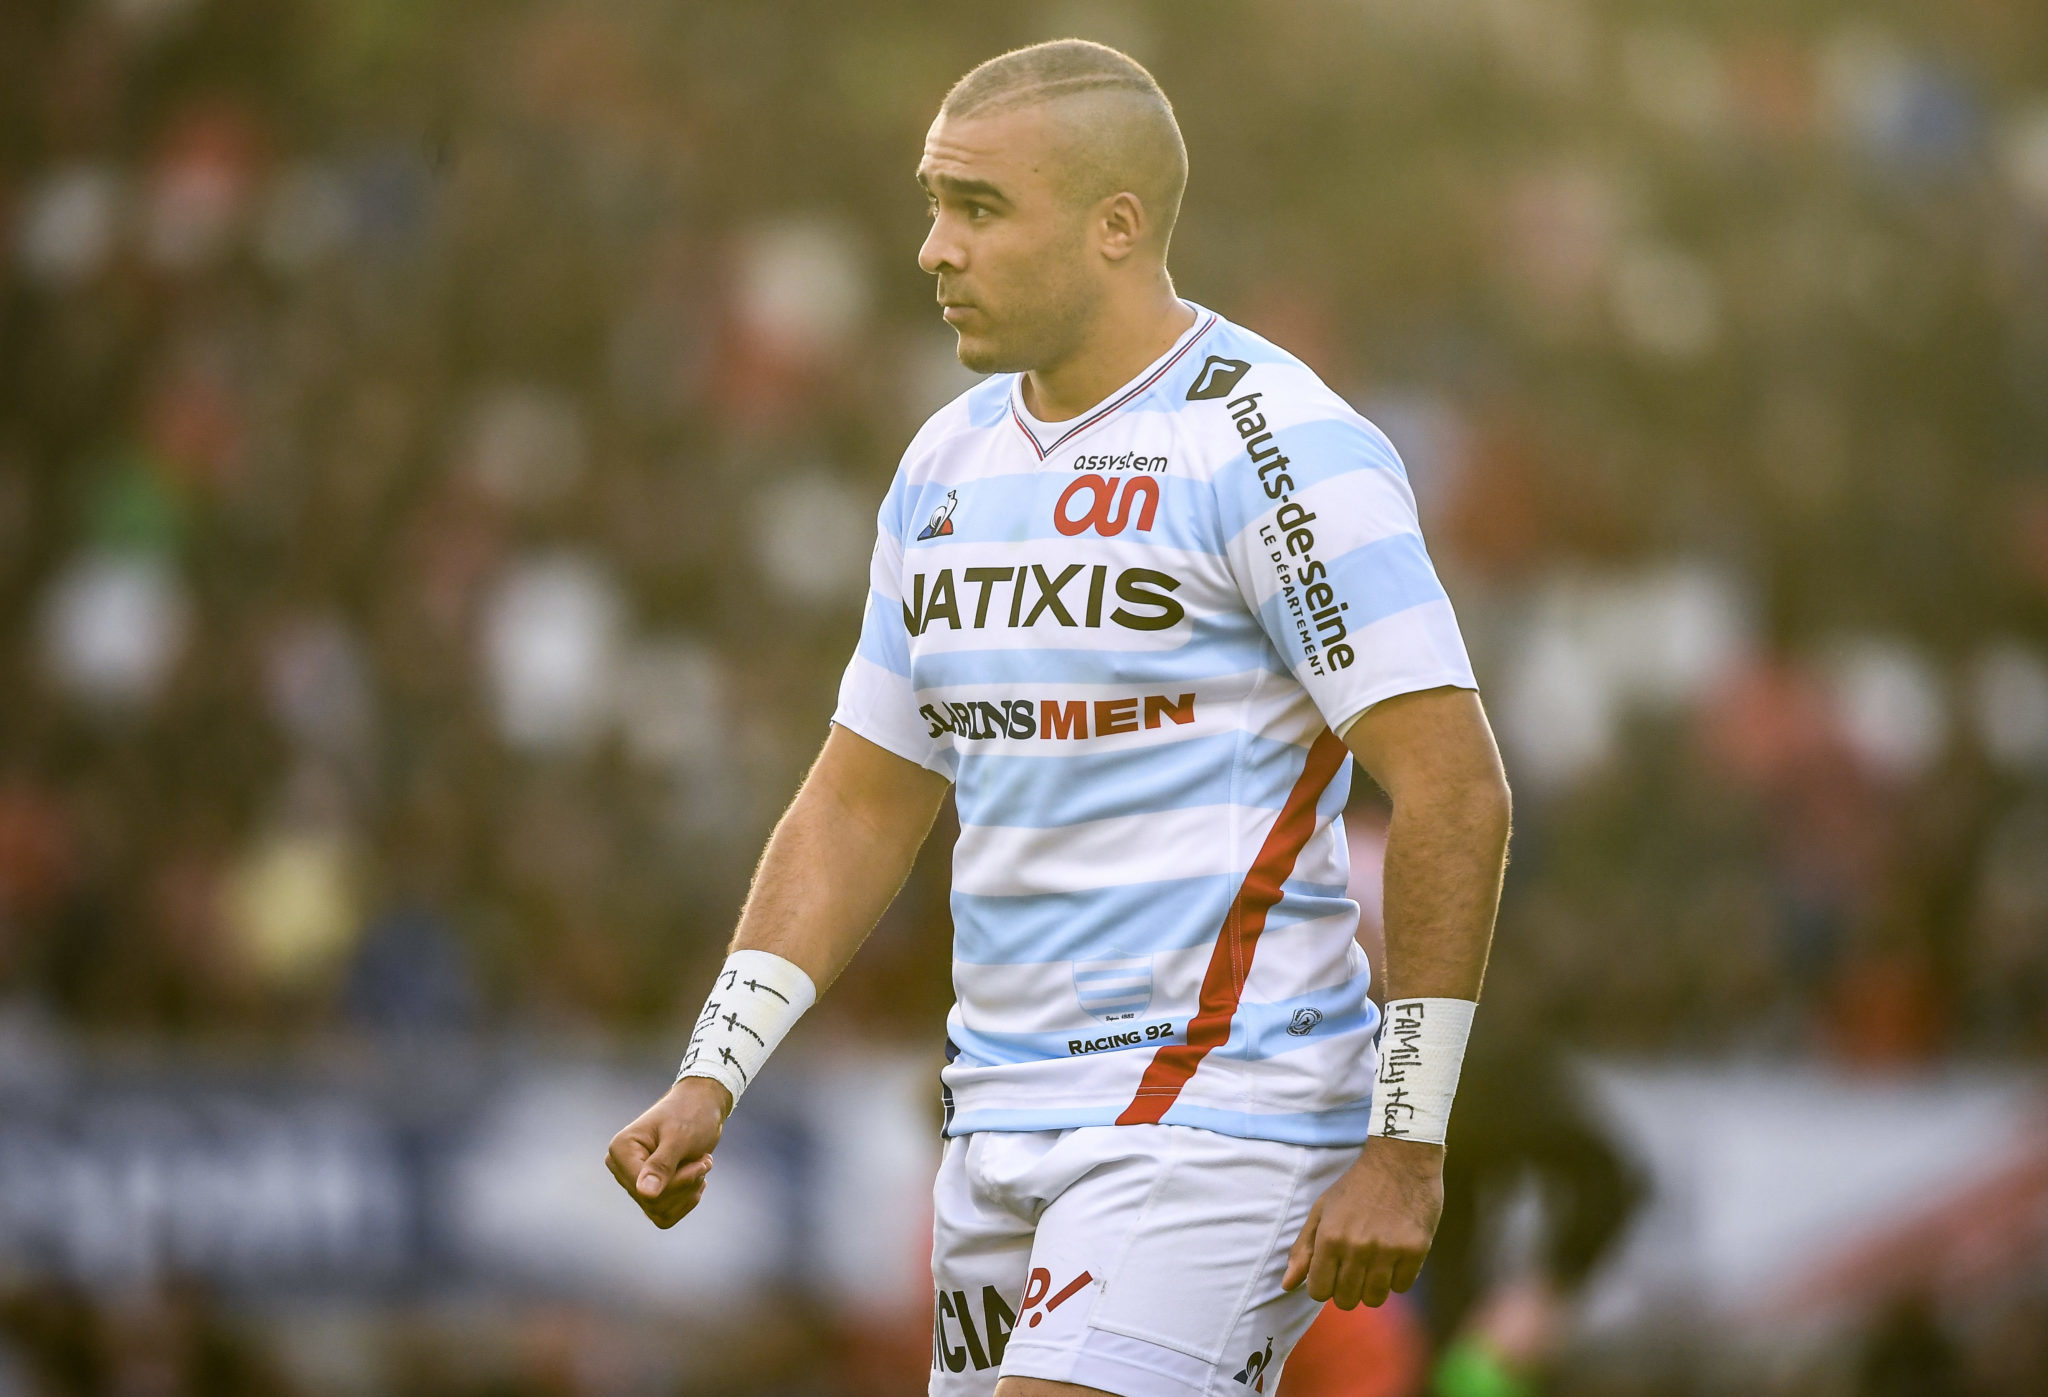 Simon Zebo of Racing 92 during the Heineken Champions Cup Pool 4 Round 5 match between Ulster and Racing 92 at the Kingspan Stadium in Belfast, Co. Antrim. Photo by David Fitzgerald/Sportsfile